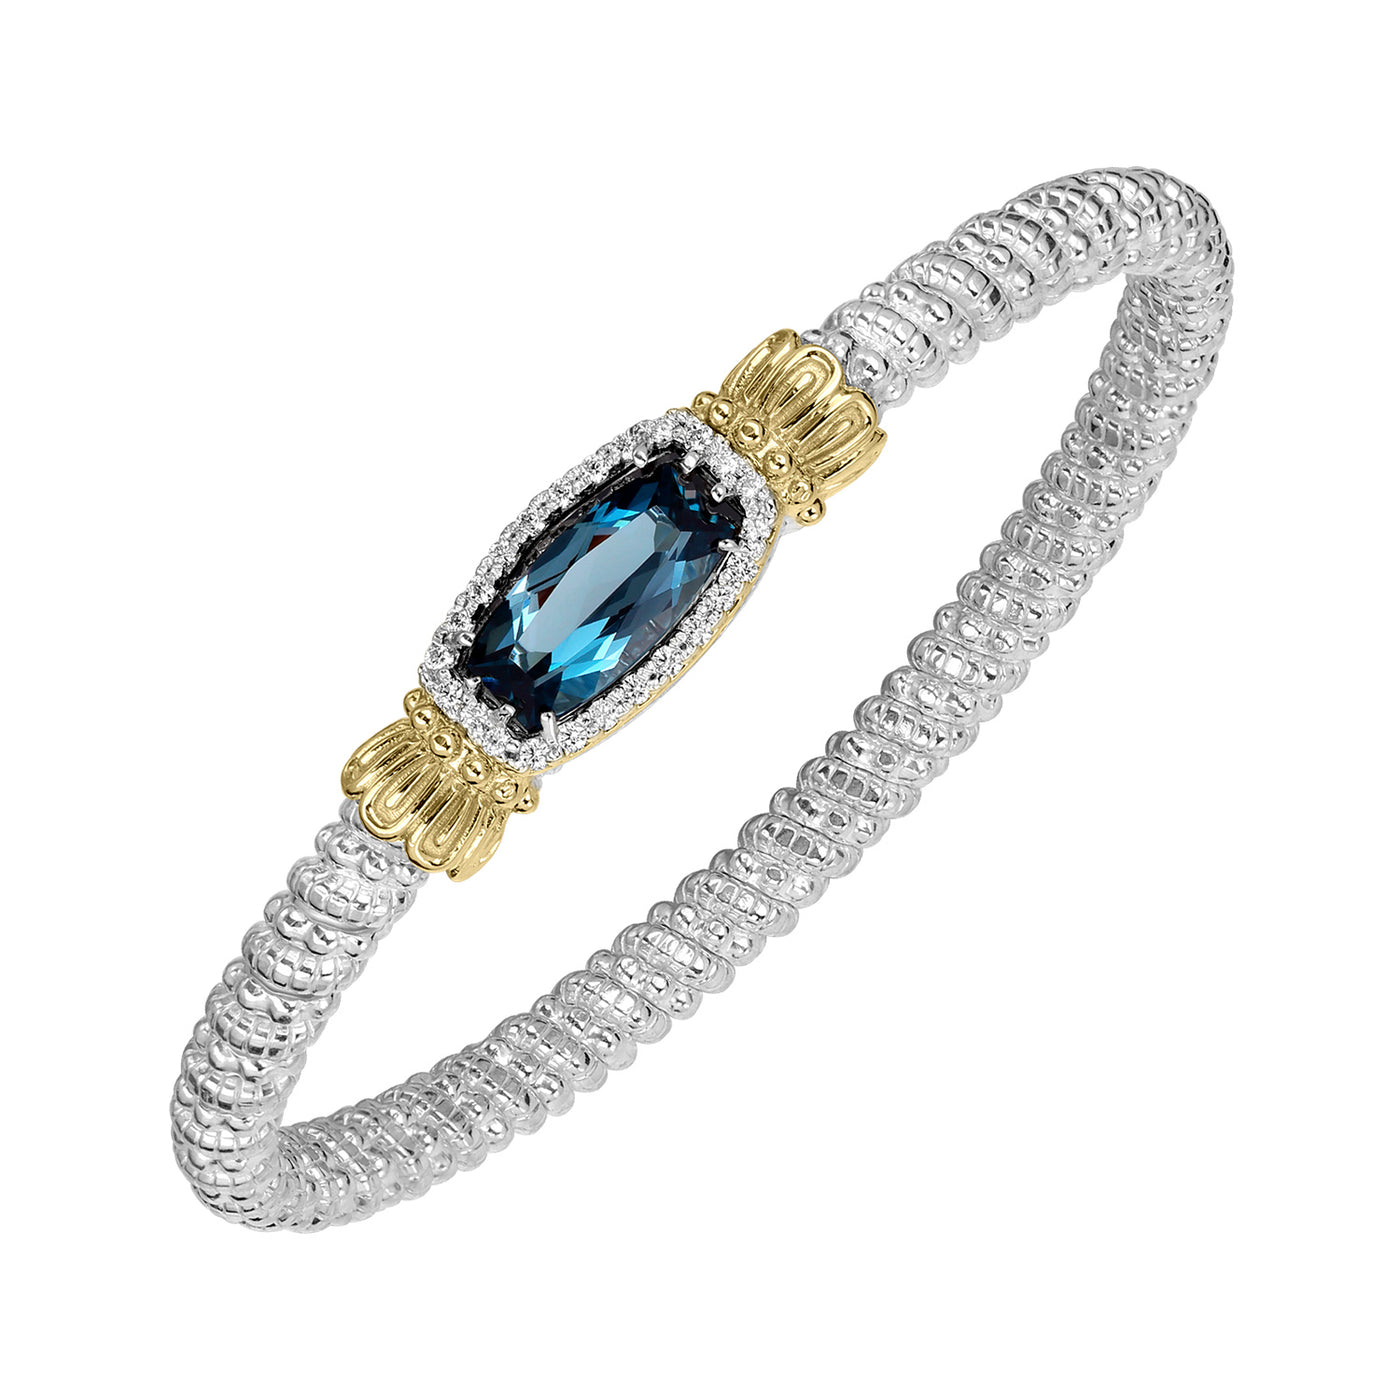 Vahan Sterling Silver and 14k Yellow Gold Moiré Beaded® Bangle Bracelet with Diamonds and Blue Topaz – 23554DLBT04